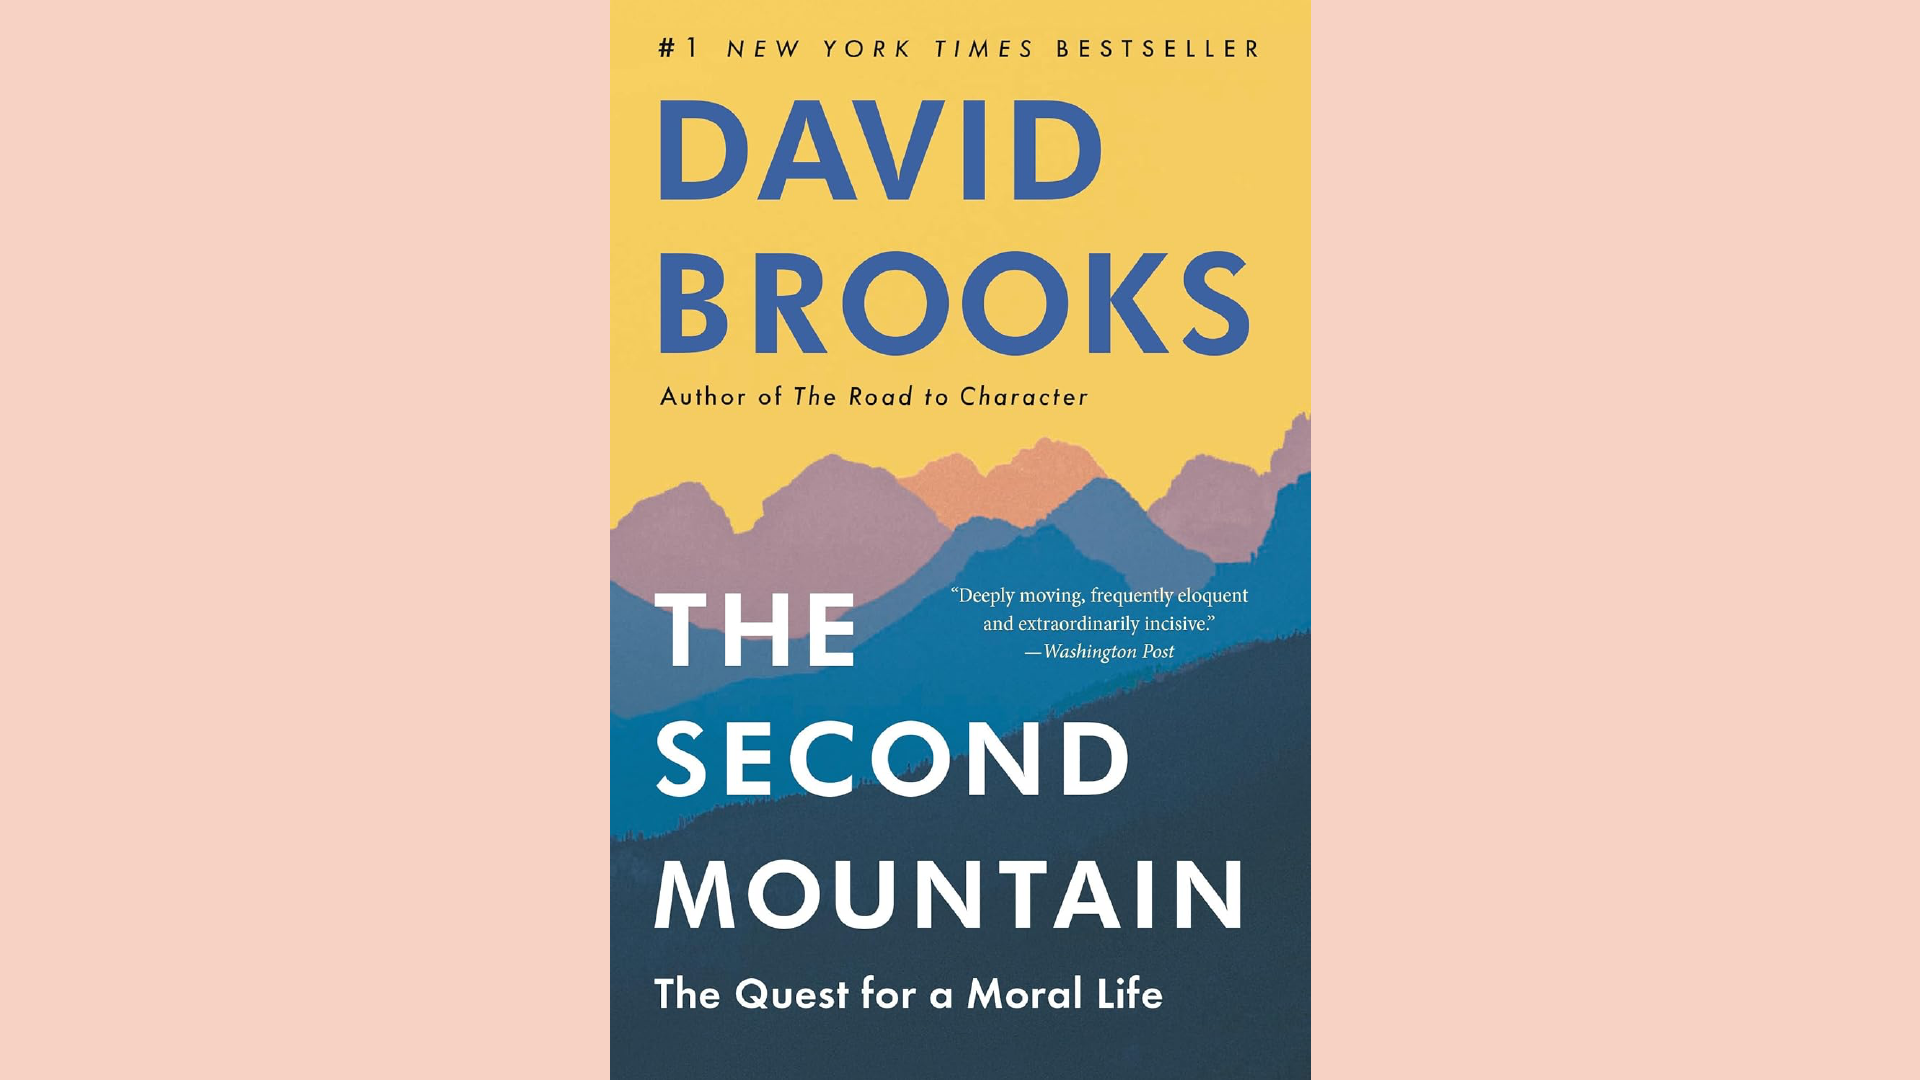 Summary: The Second Mountain by David Brooks